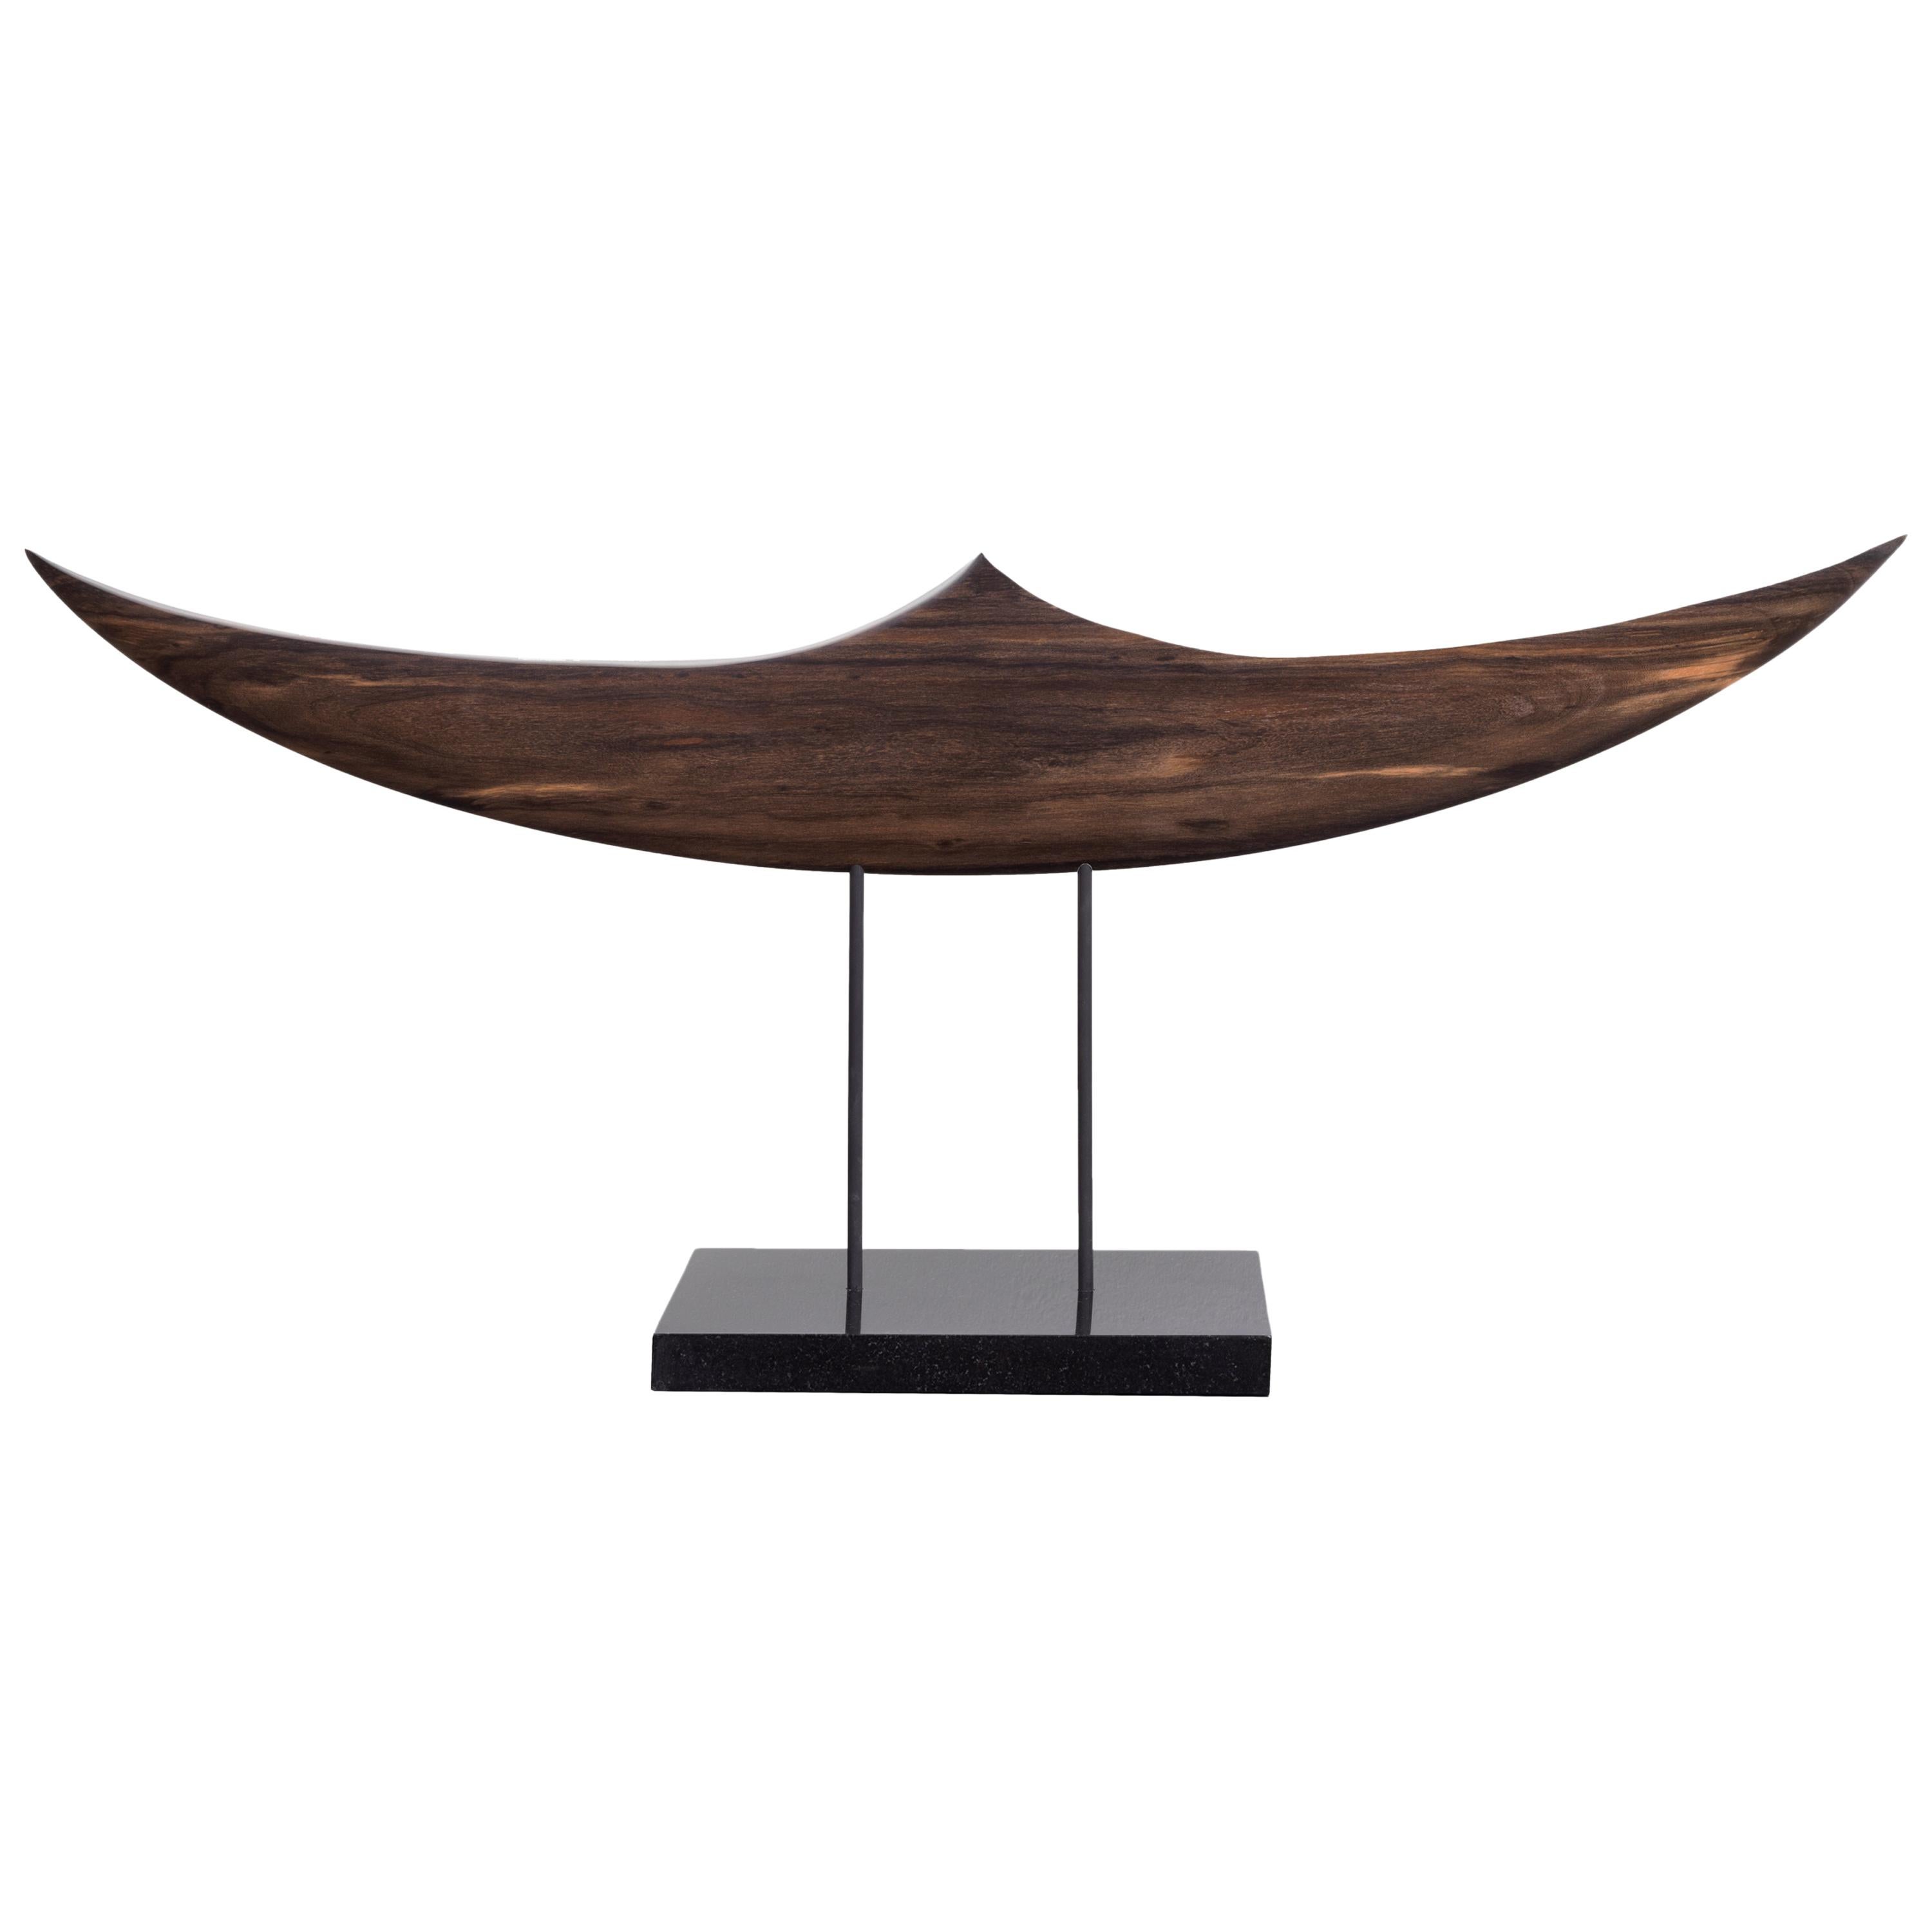 Passage, Hand Carved and Polished Ebony Wood Boat Sculpture on Granite Base